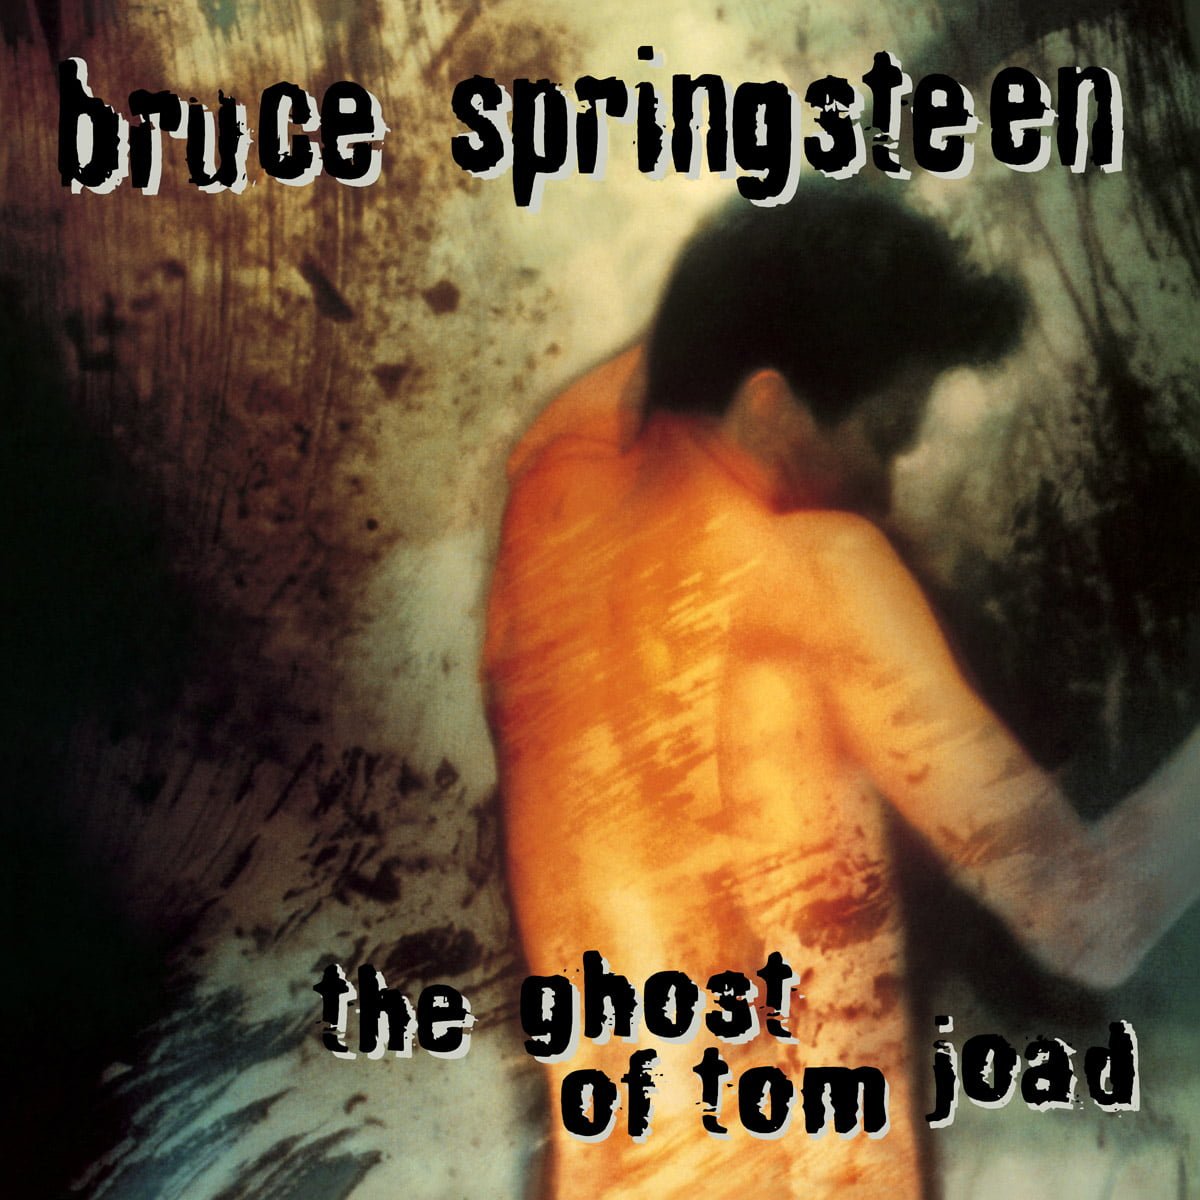 Bruce Springsteen The Ghost of Tom Joad front cover